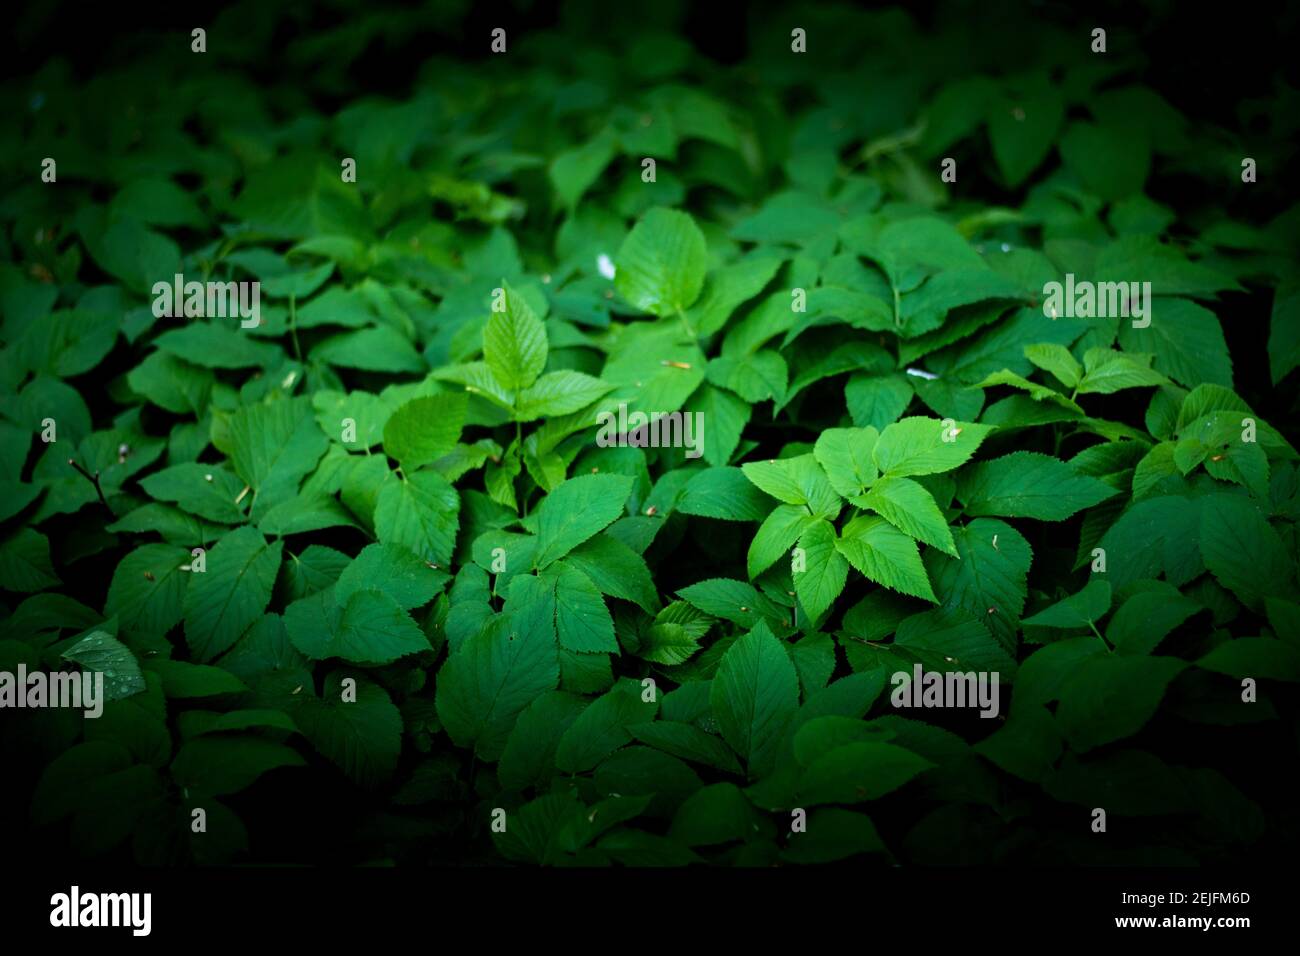 Green leaves of a goutweed plant Stock Photo